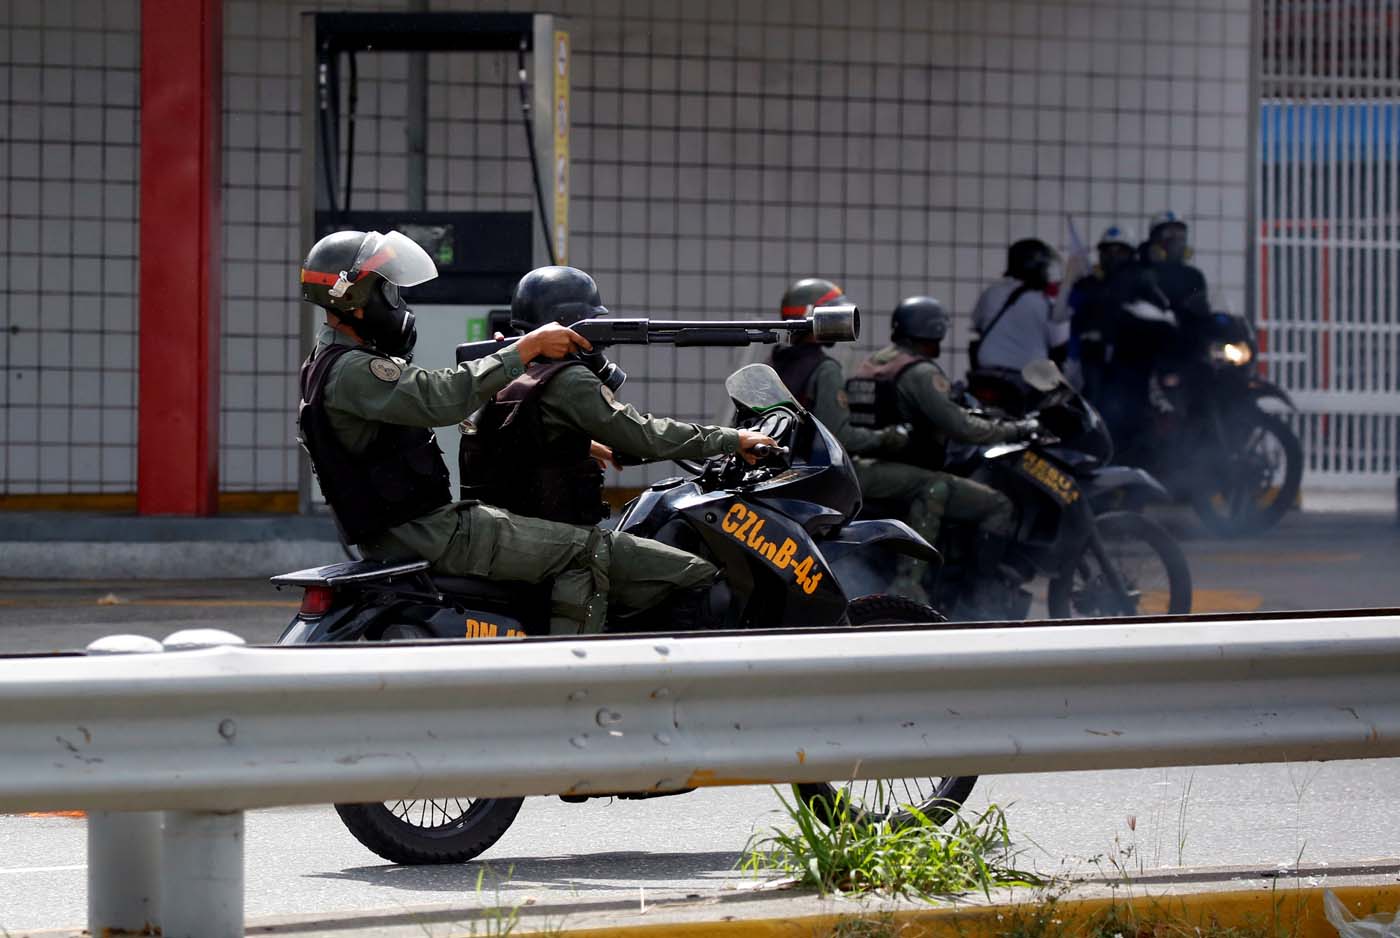 Members of security forces ride their motorcycles during a rally against Venezuelan President Nicolas Maduro's government in Caracas, Venezuela, July 6, 2017. REUTERS/Carlos Garcia Rawlins